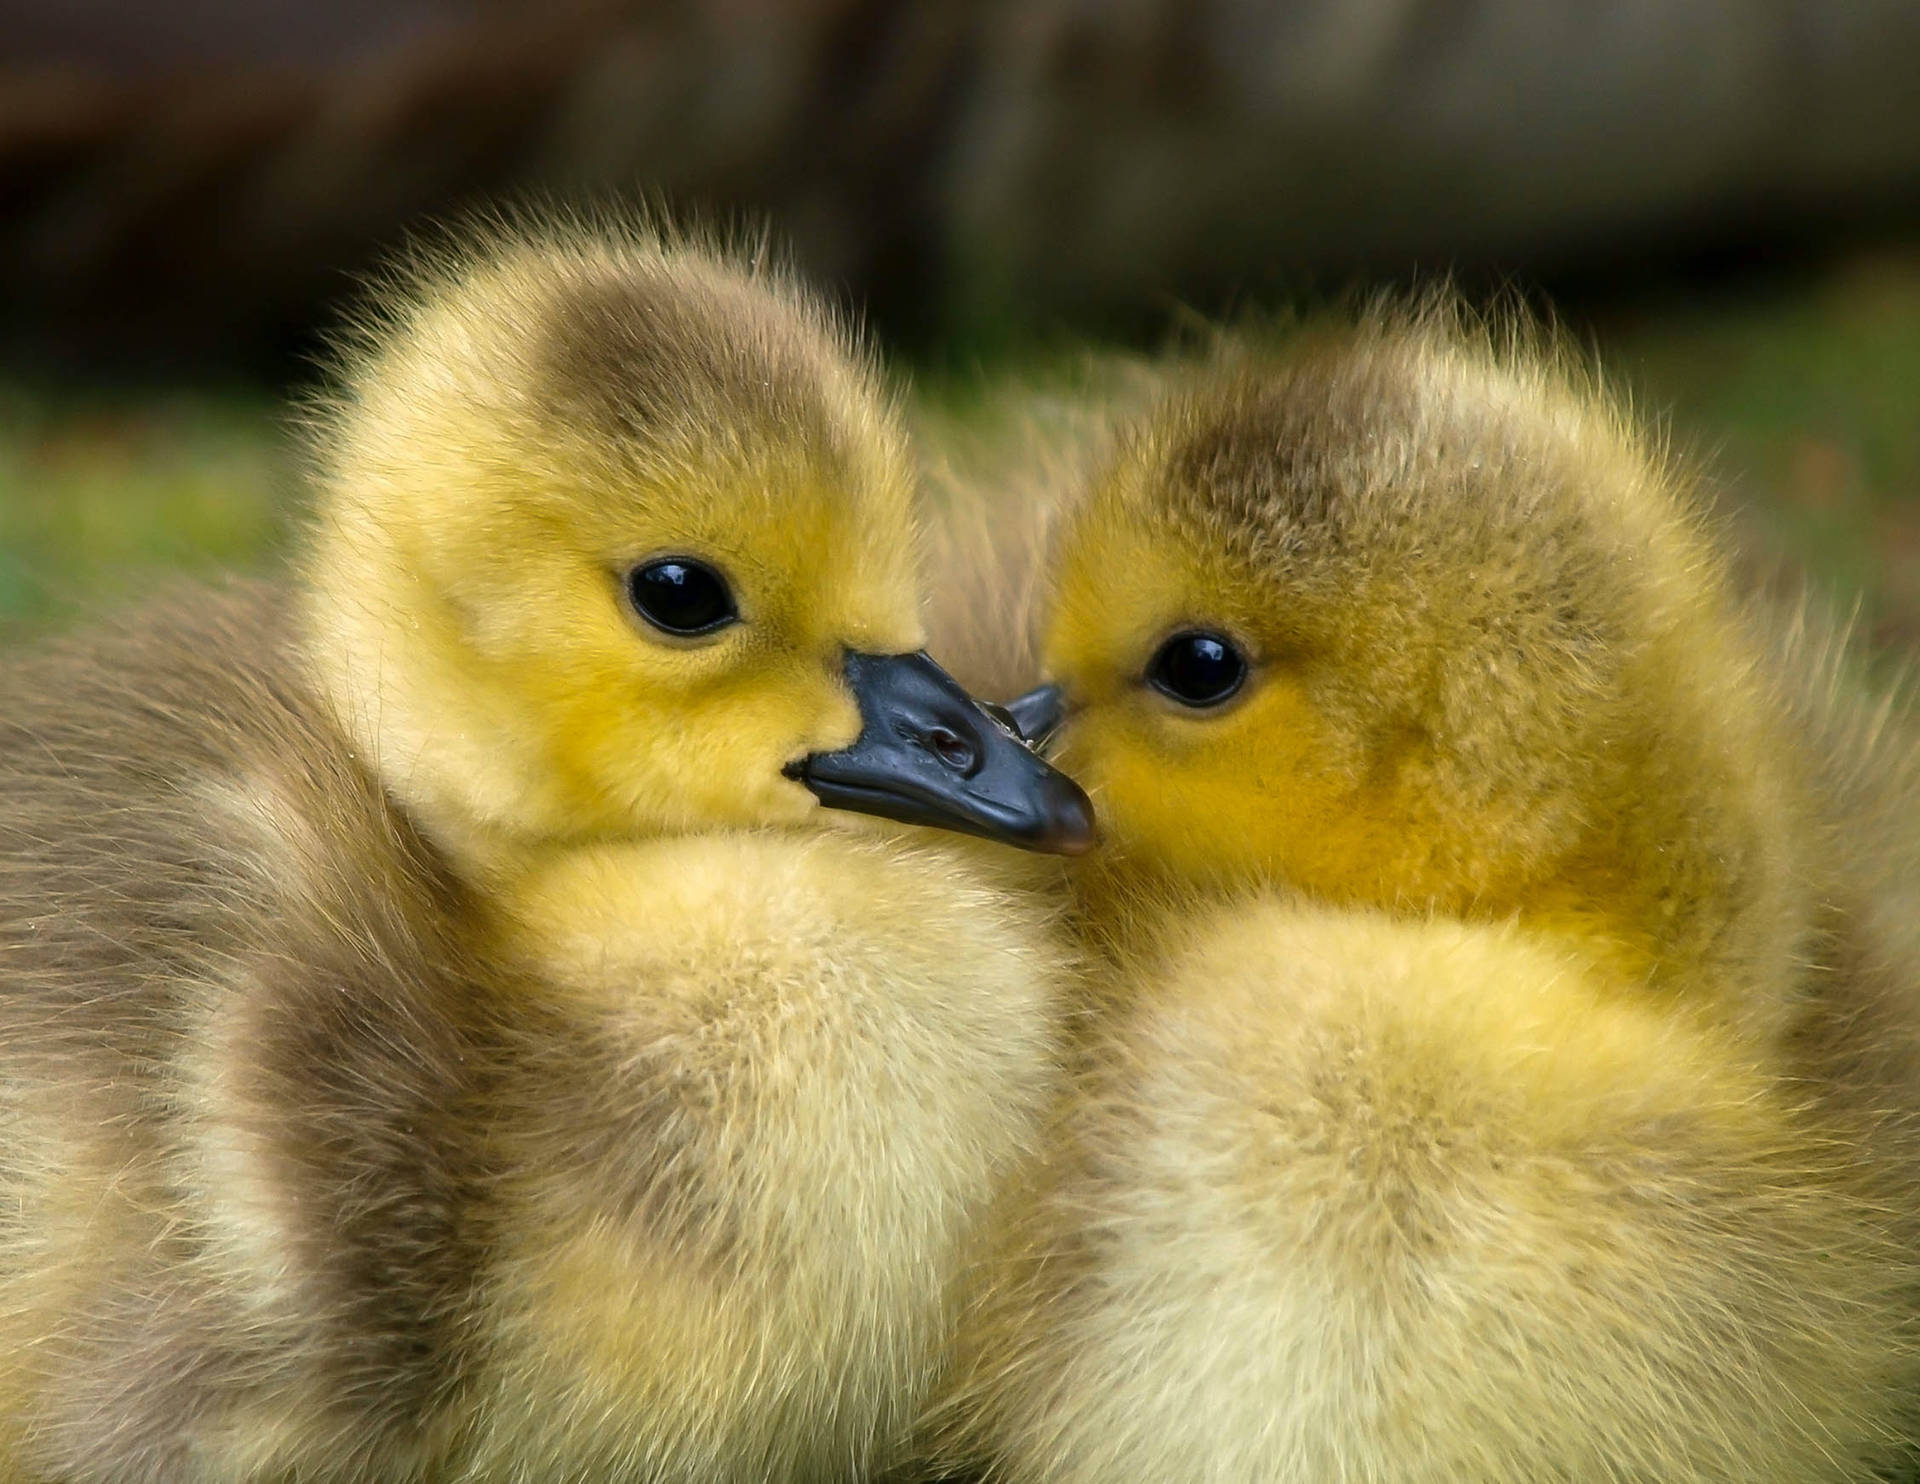 Free Baby Duck Wallpaper Downloads, [100+] Baby Duck Wallpapers for FREE |  